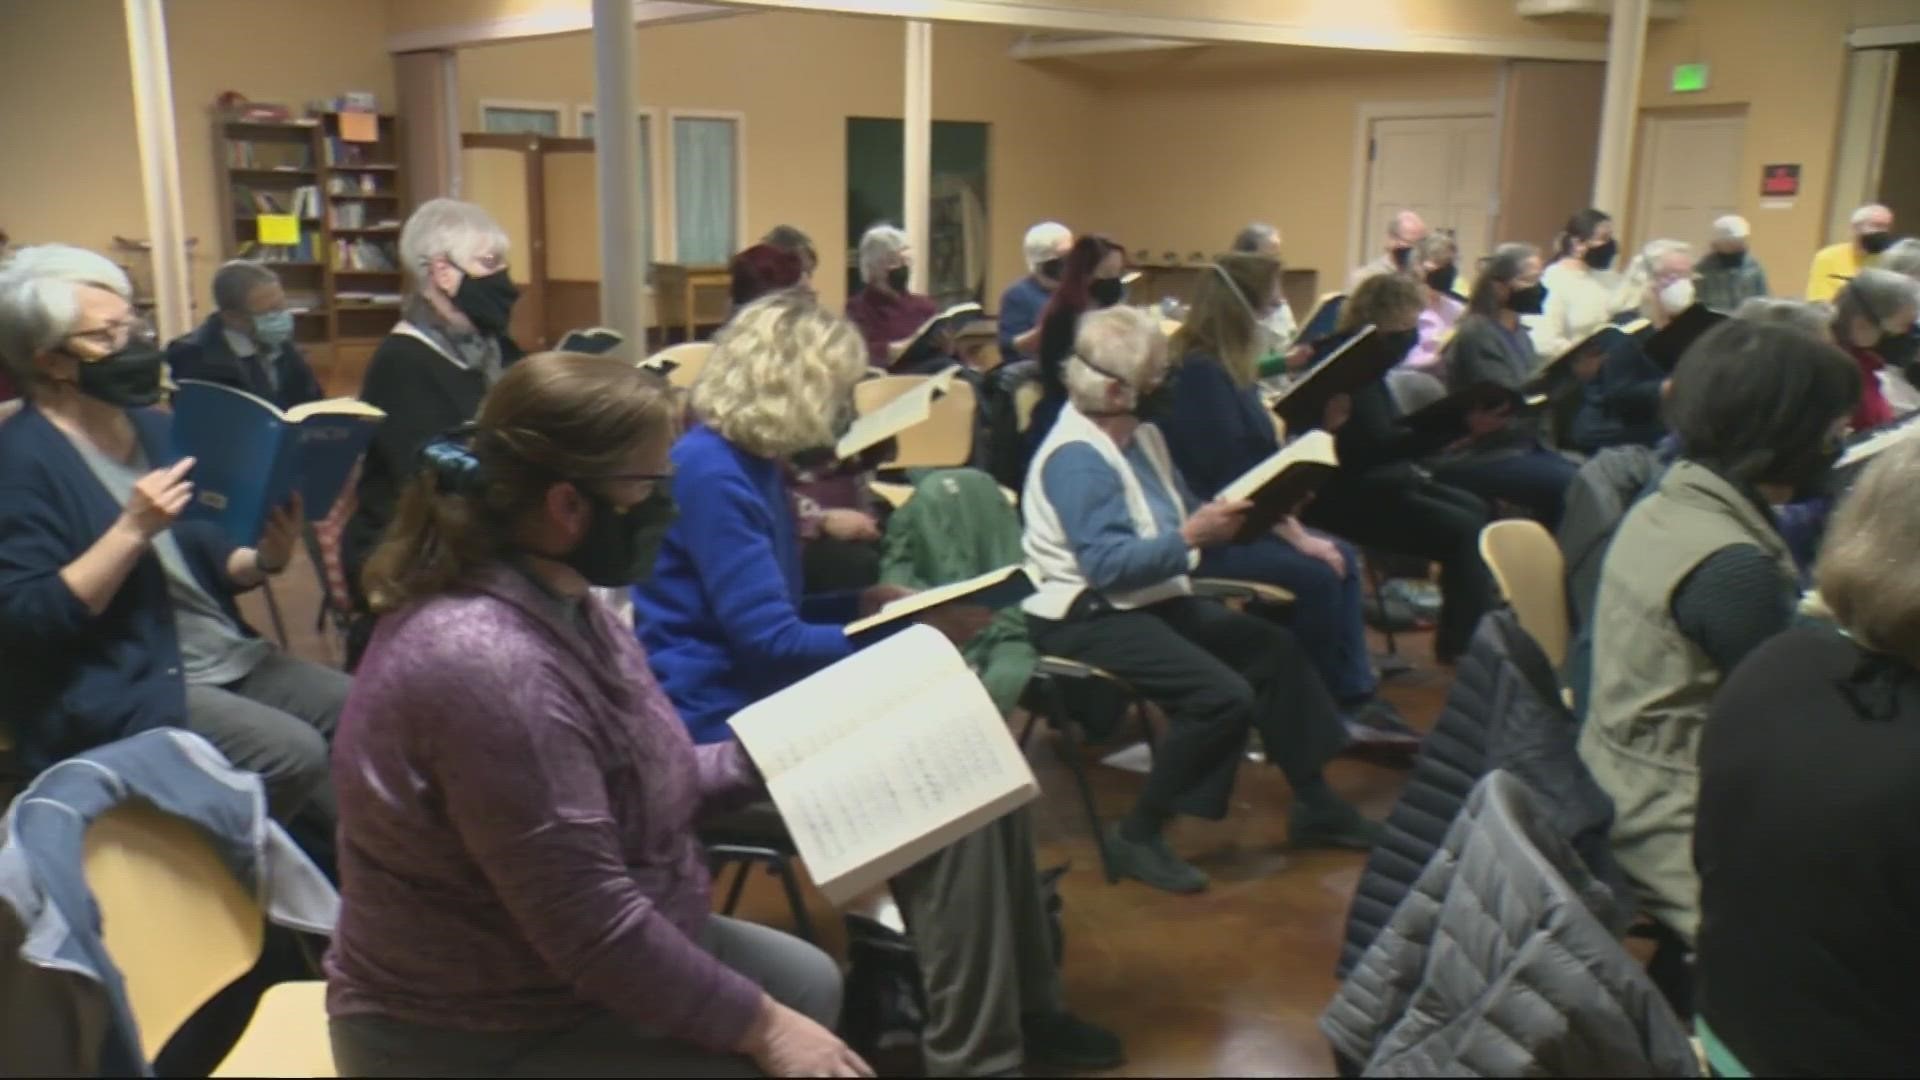 A Portland group, the Bach Cantata choir is missing close to over $4k in ticket sales after using a Seattle-based ticketing platform from a December show.